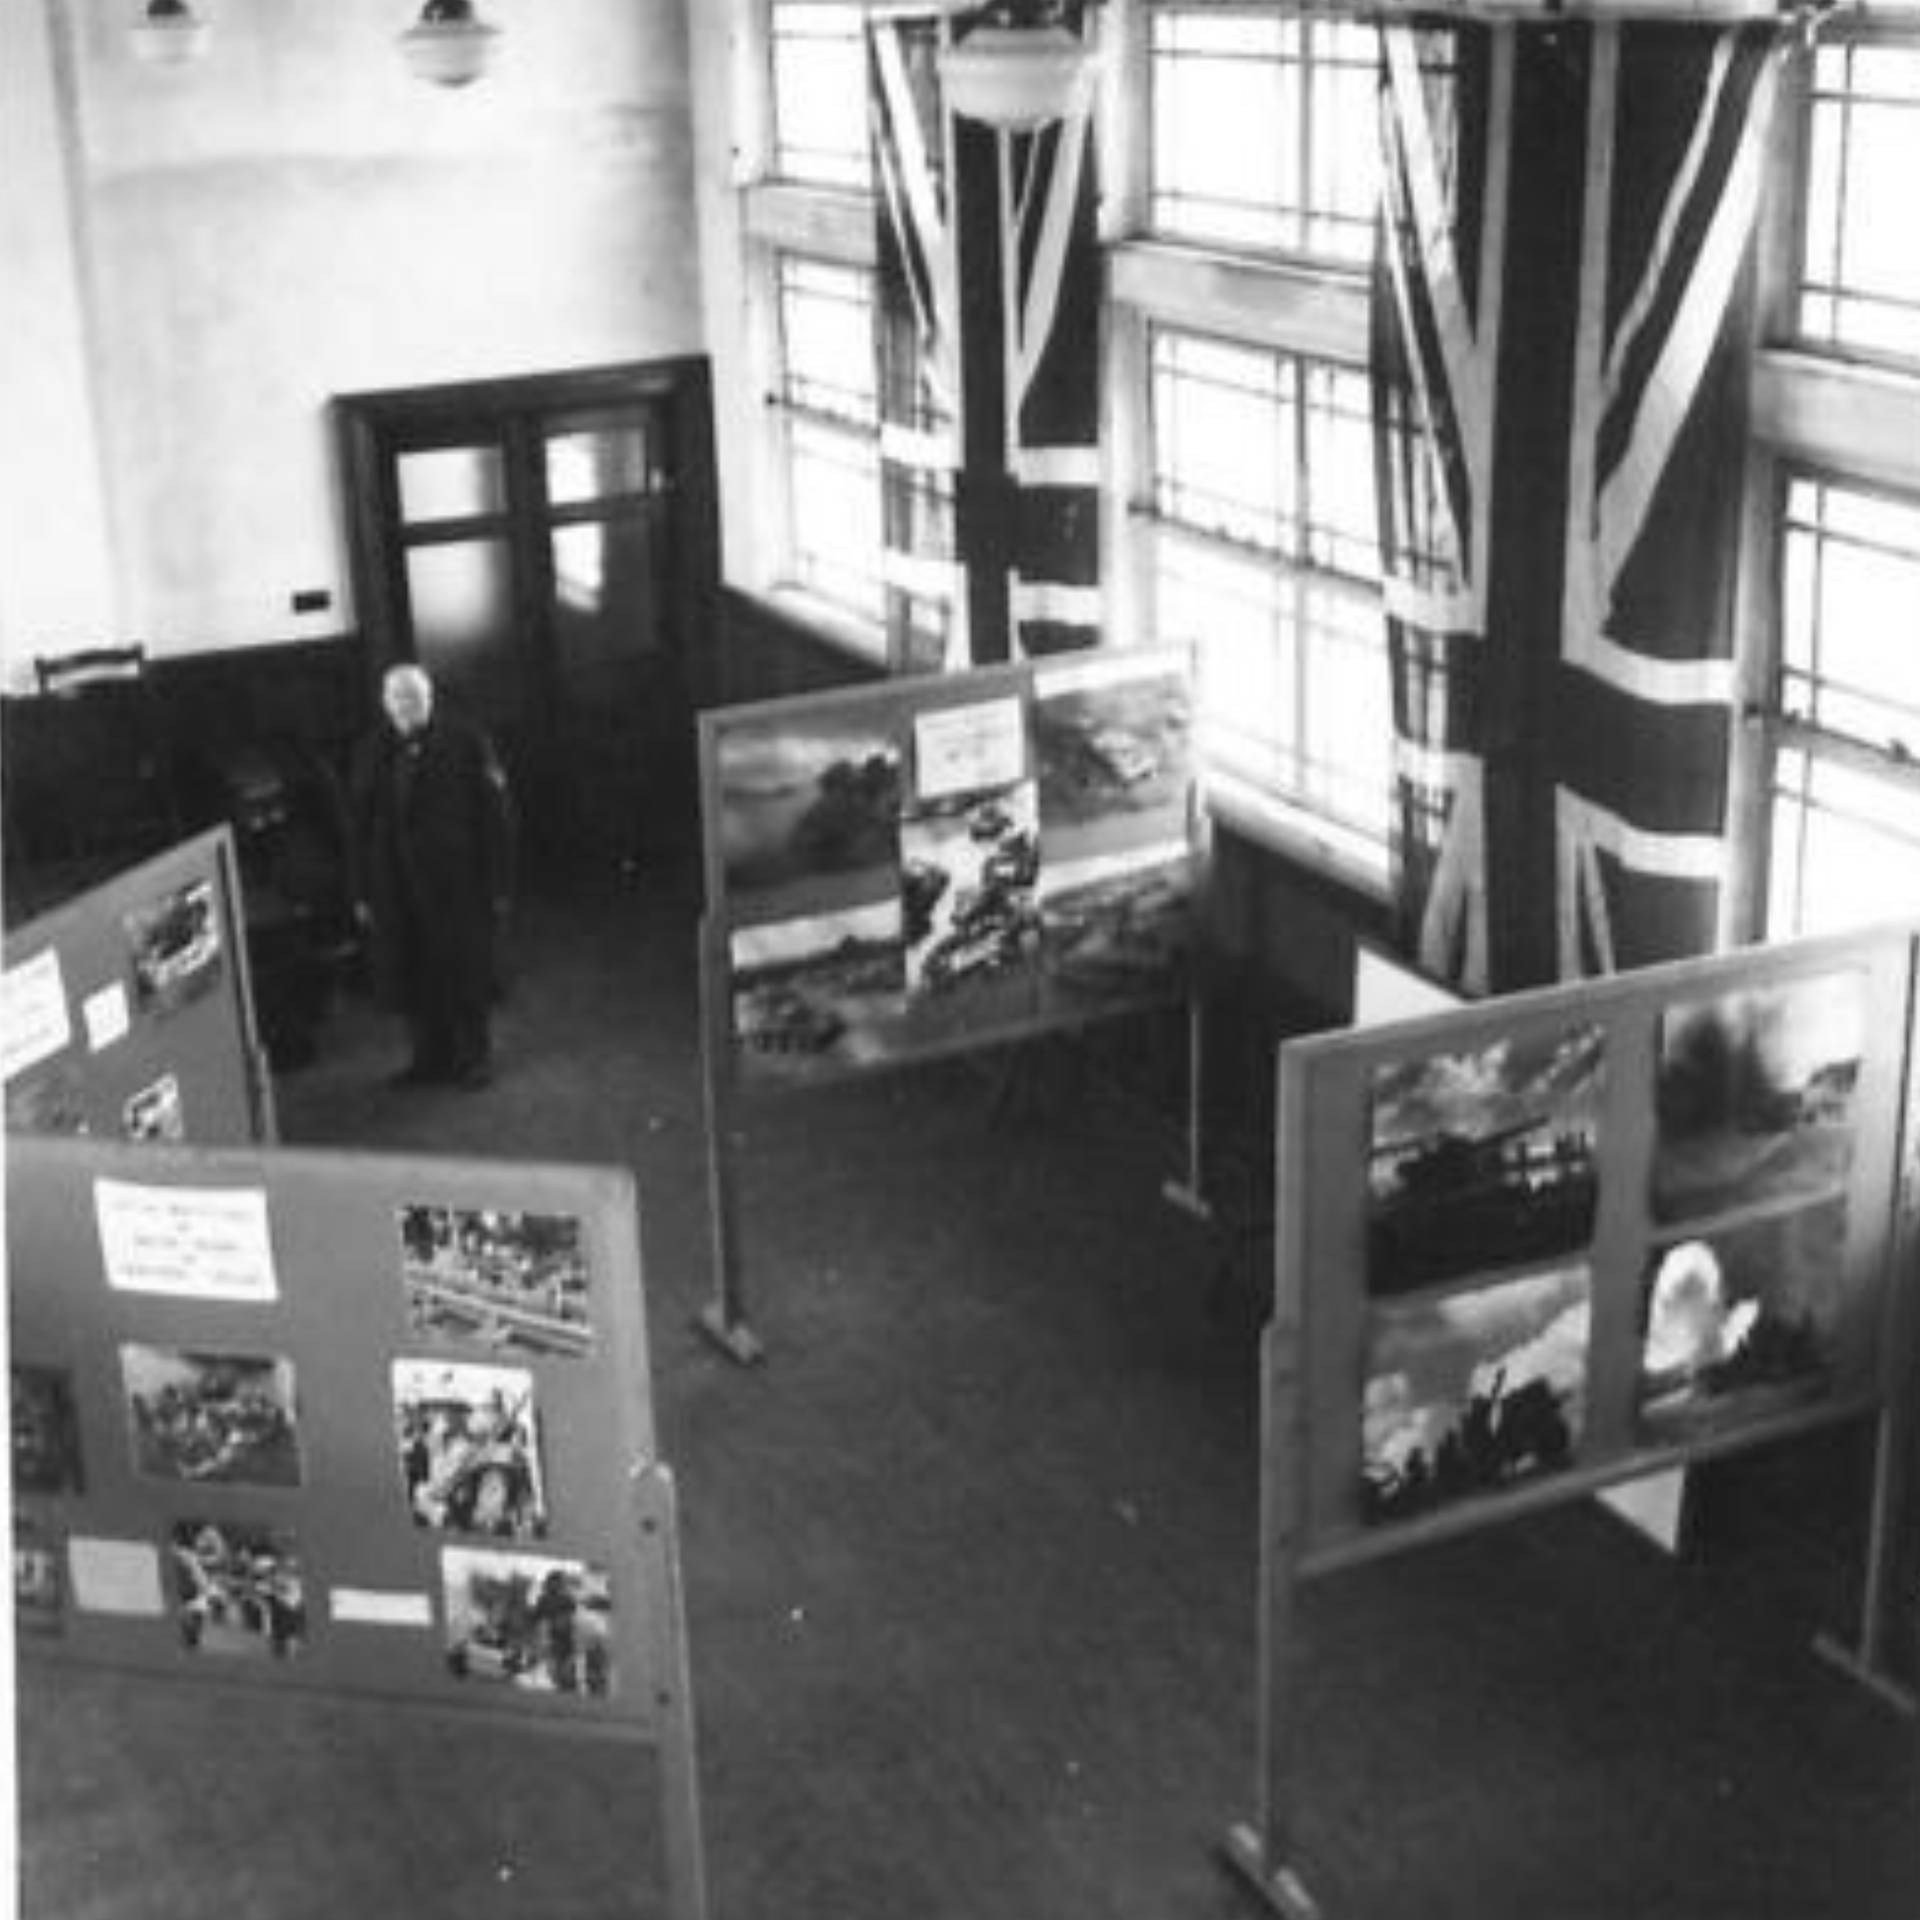 An exhibition of War Office photographs somewhere in Northern Ireland.